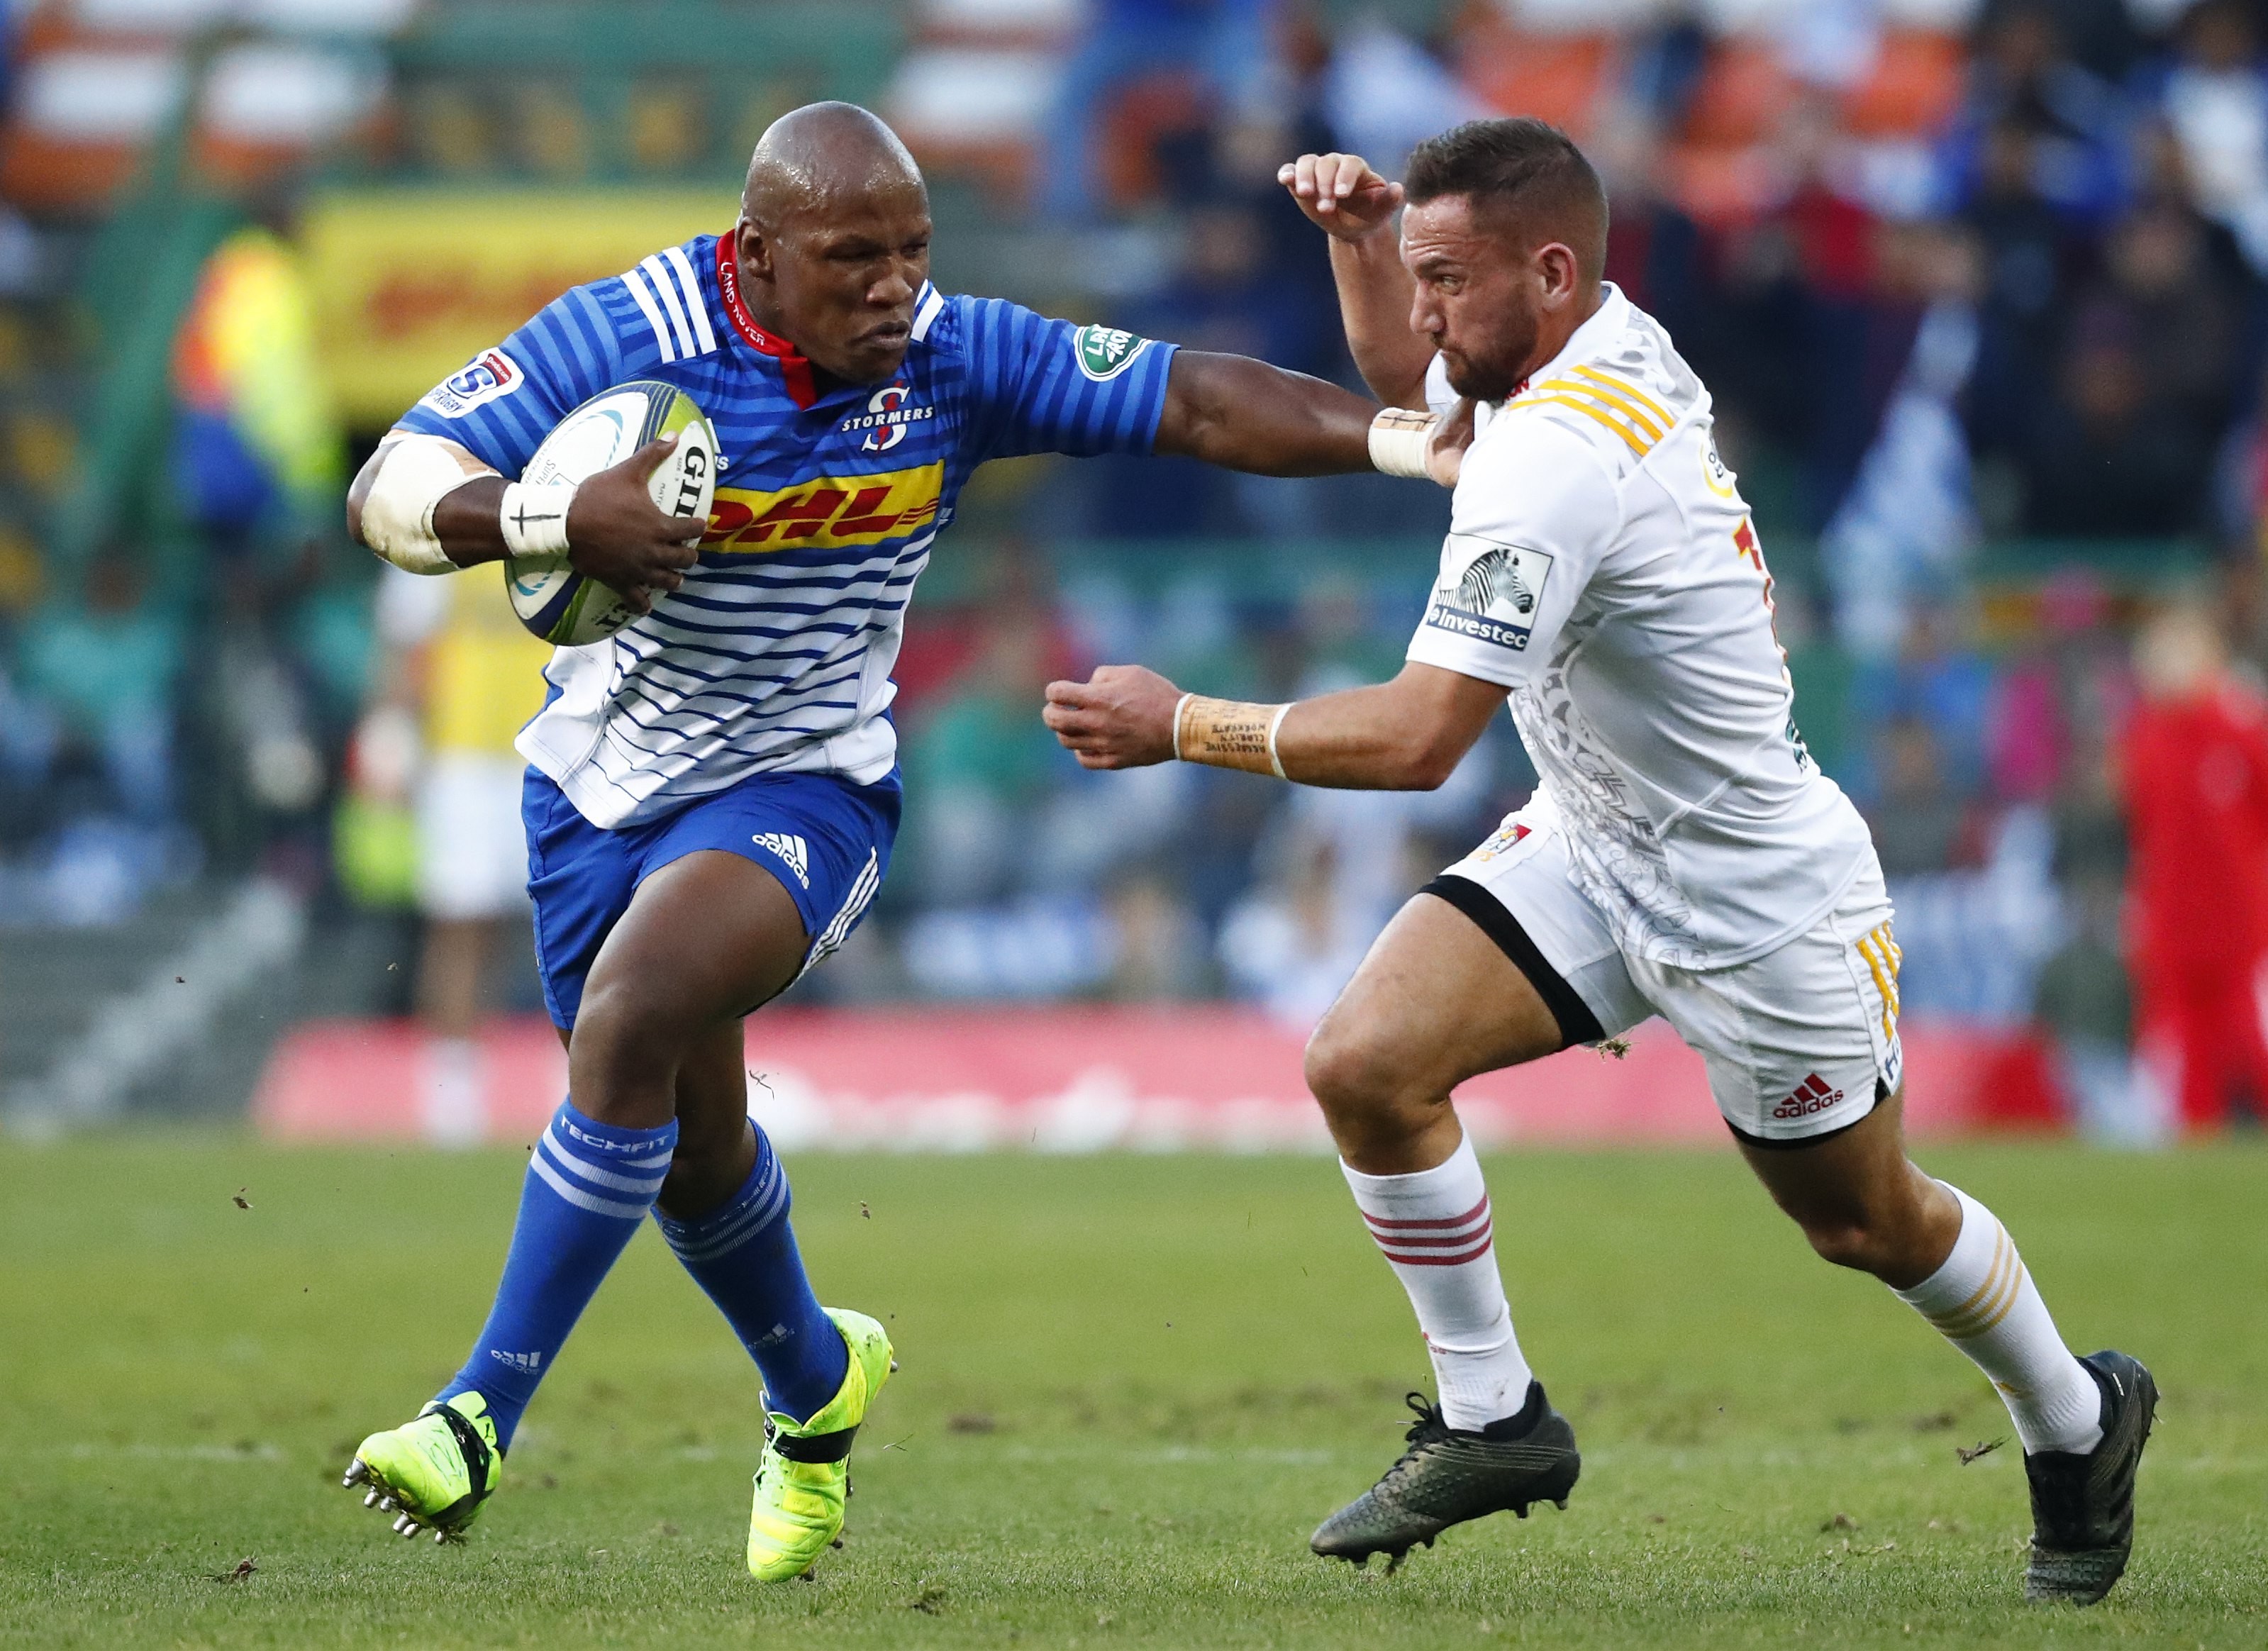 Bongi Mbonambi (left) from the Stormers hands off Aaron Cruden from the Chiefs. Photo: EPA